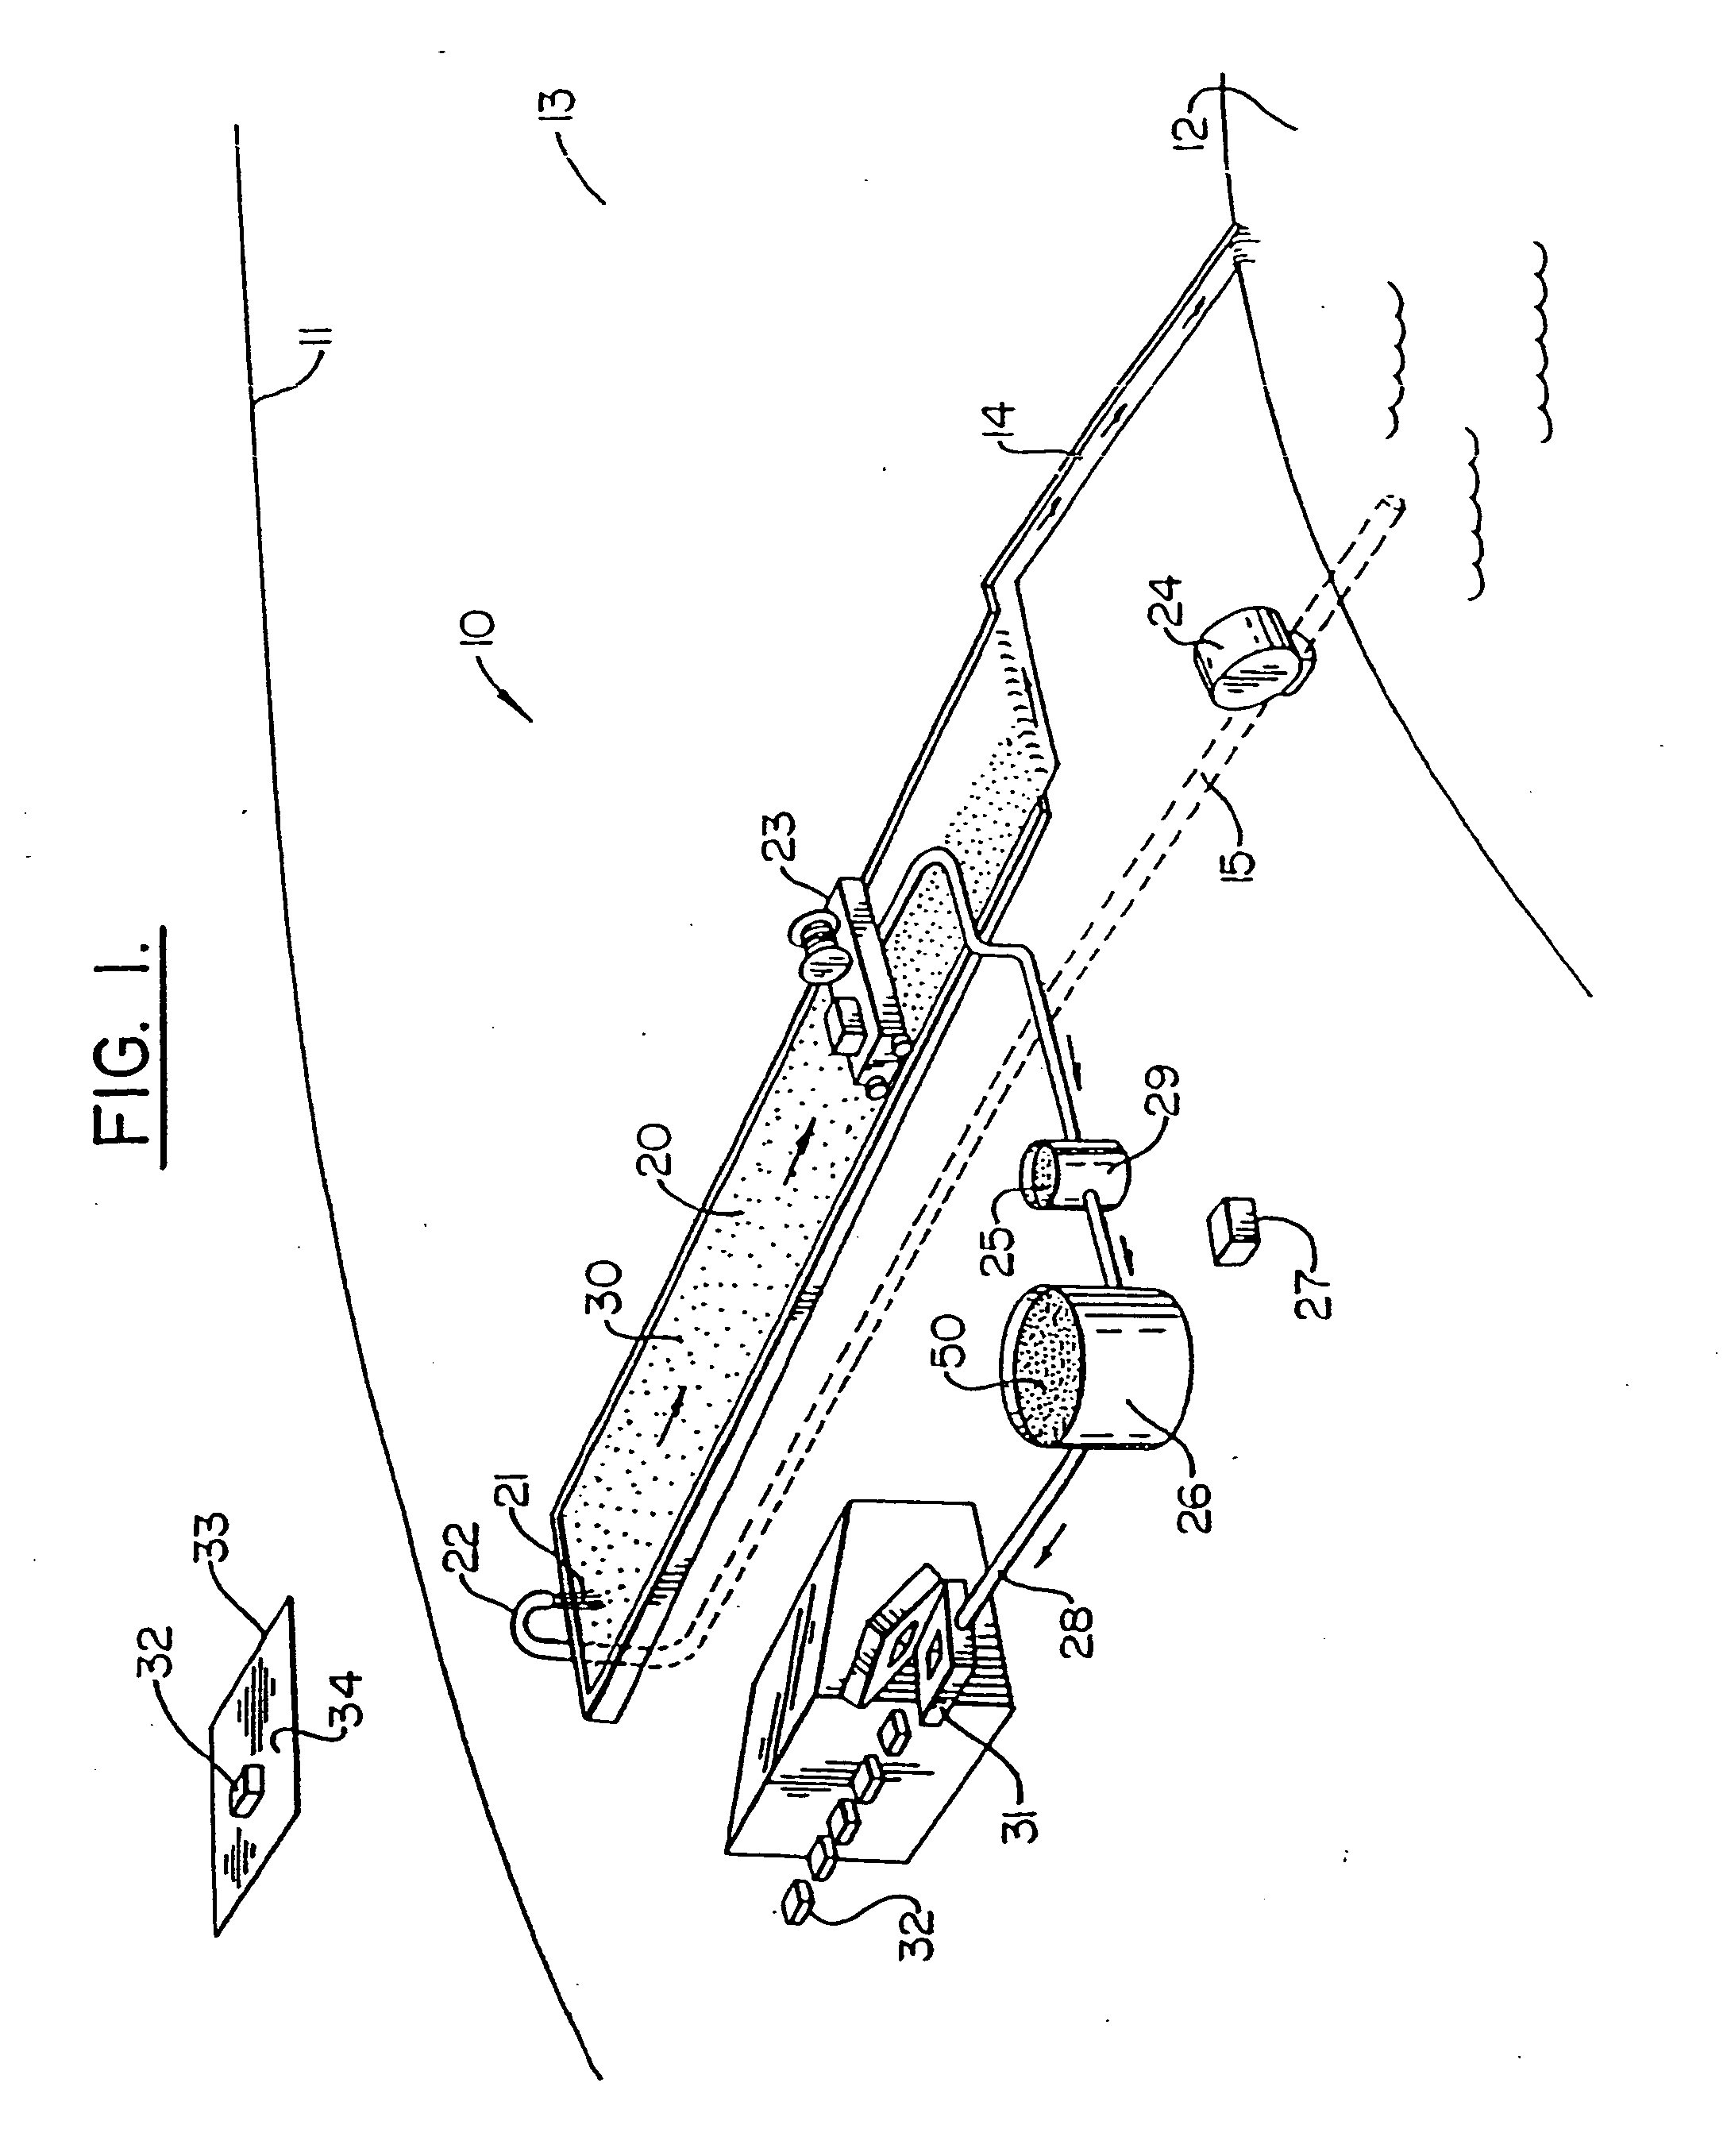 Integrated system and method for purifying water, producing pulp and paper, and improving soil quality